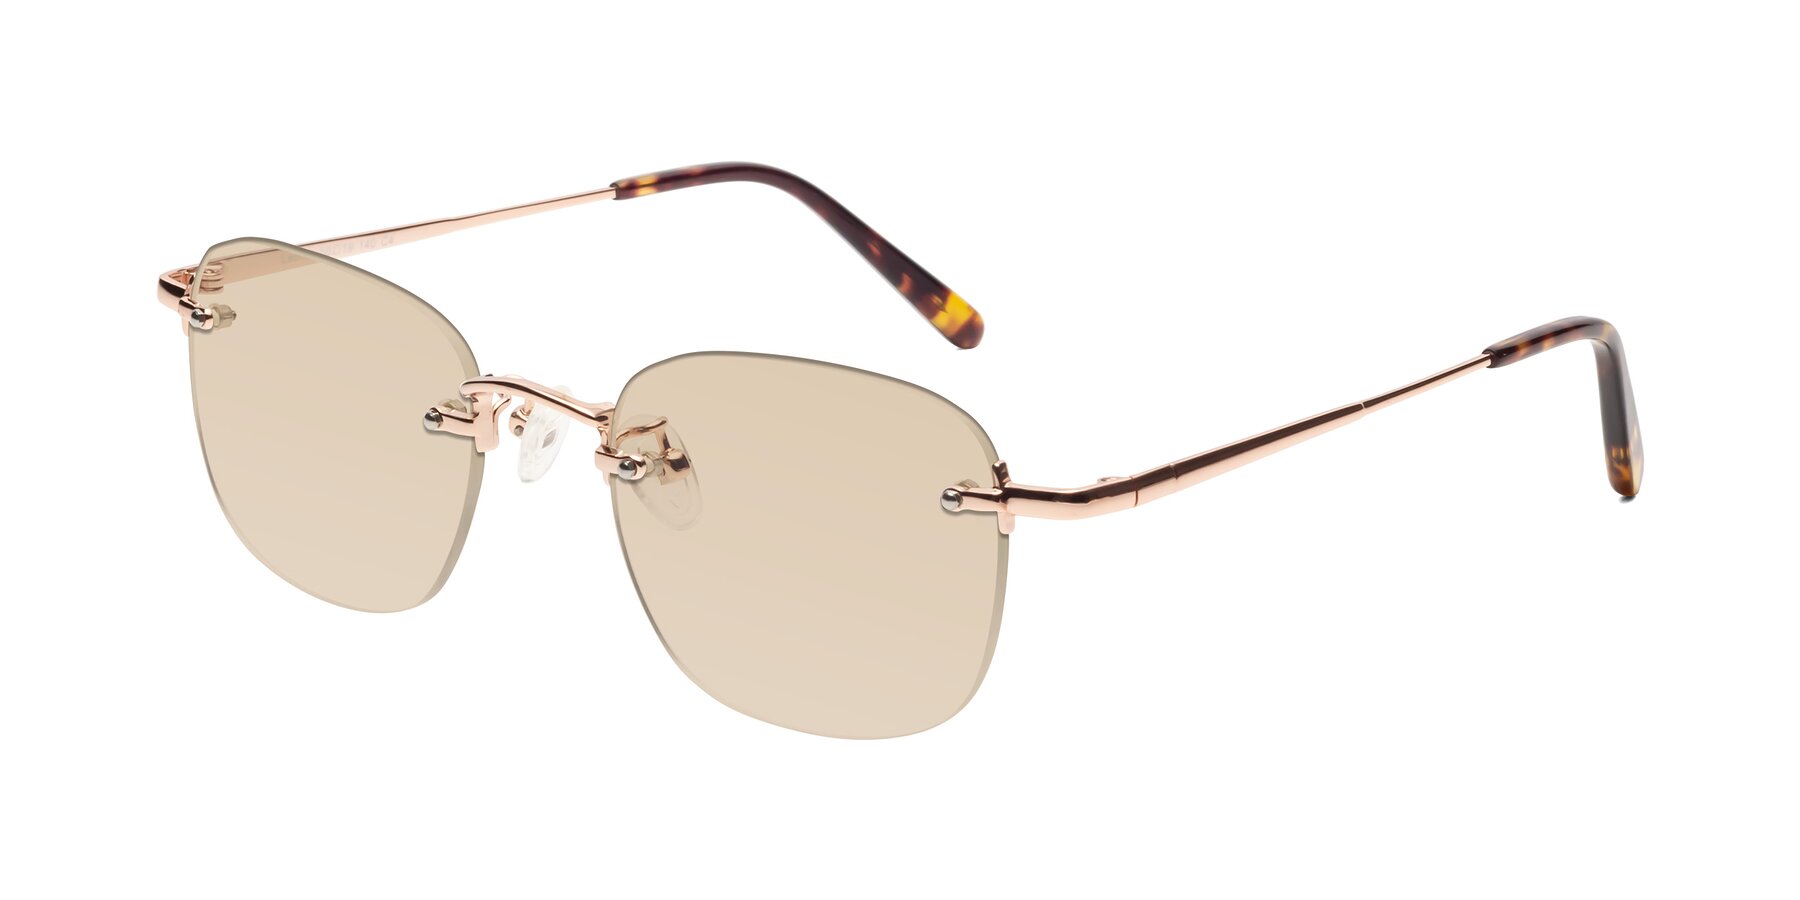 Angle of Leslie in Rose Gold with Light Brown Tinted Lenses